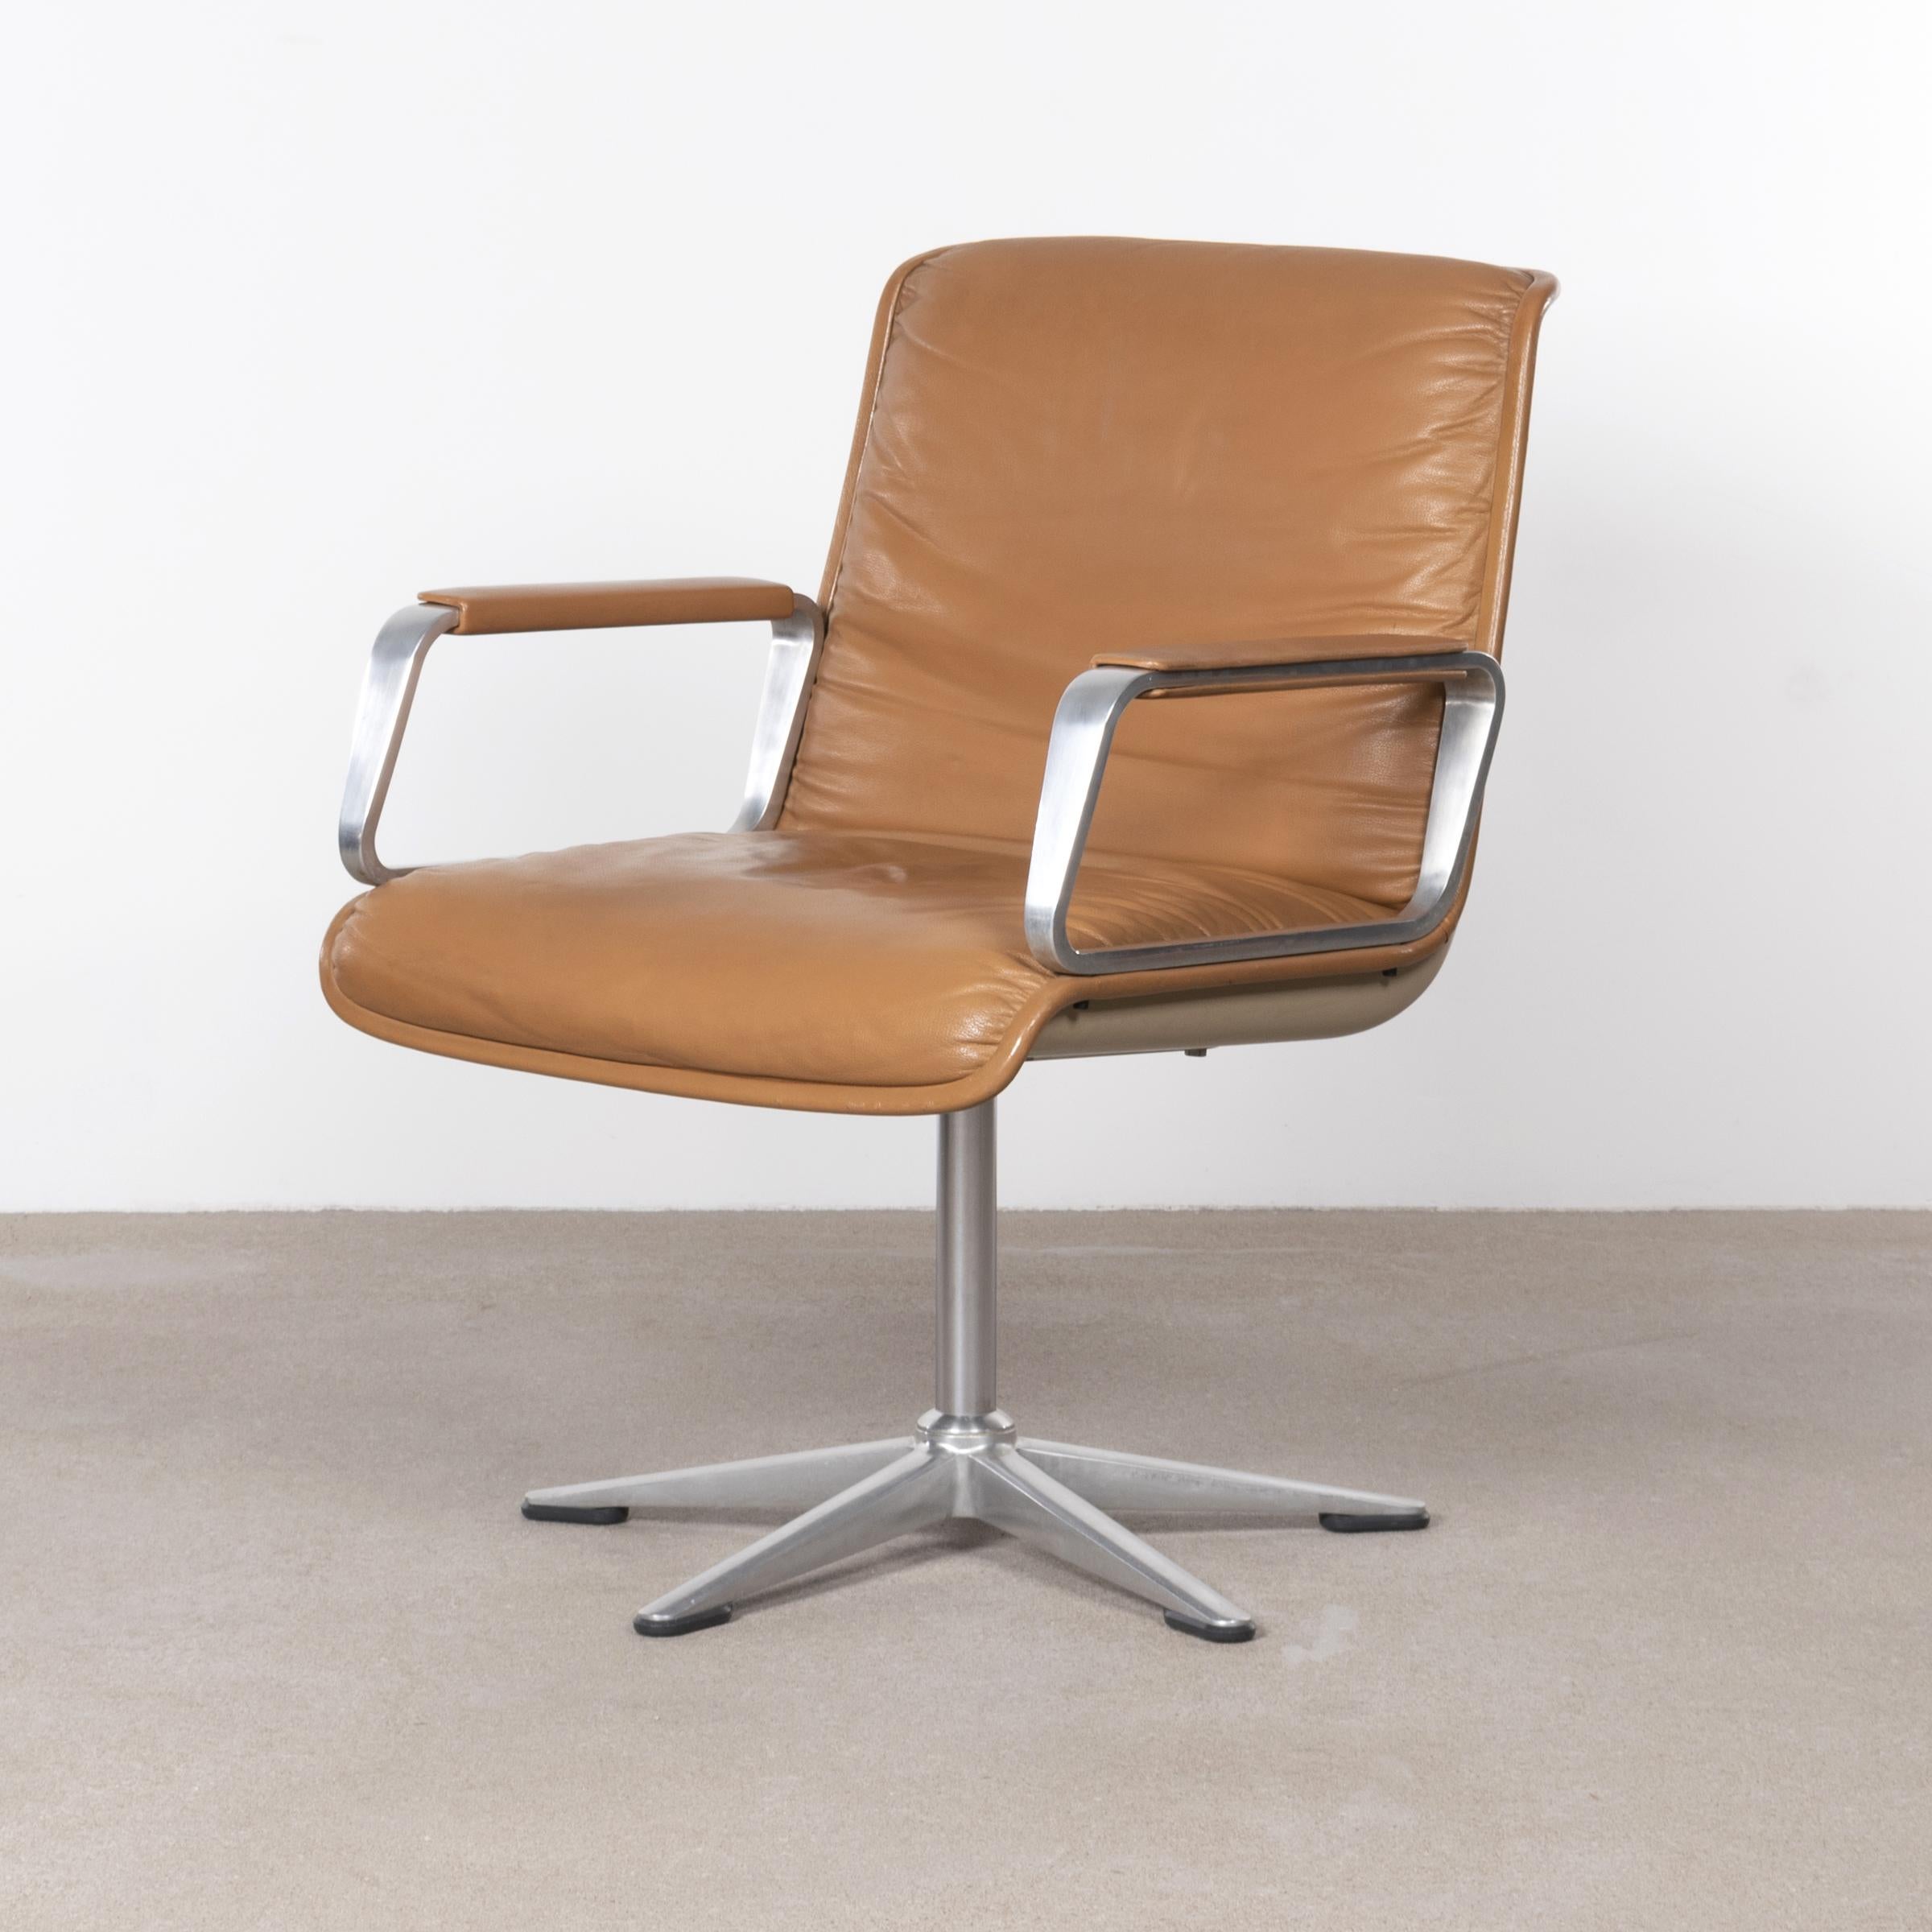 Mid-20th Century Delta Design Program 2000 Set Chairs in Padded Leather for Wilkhahn